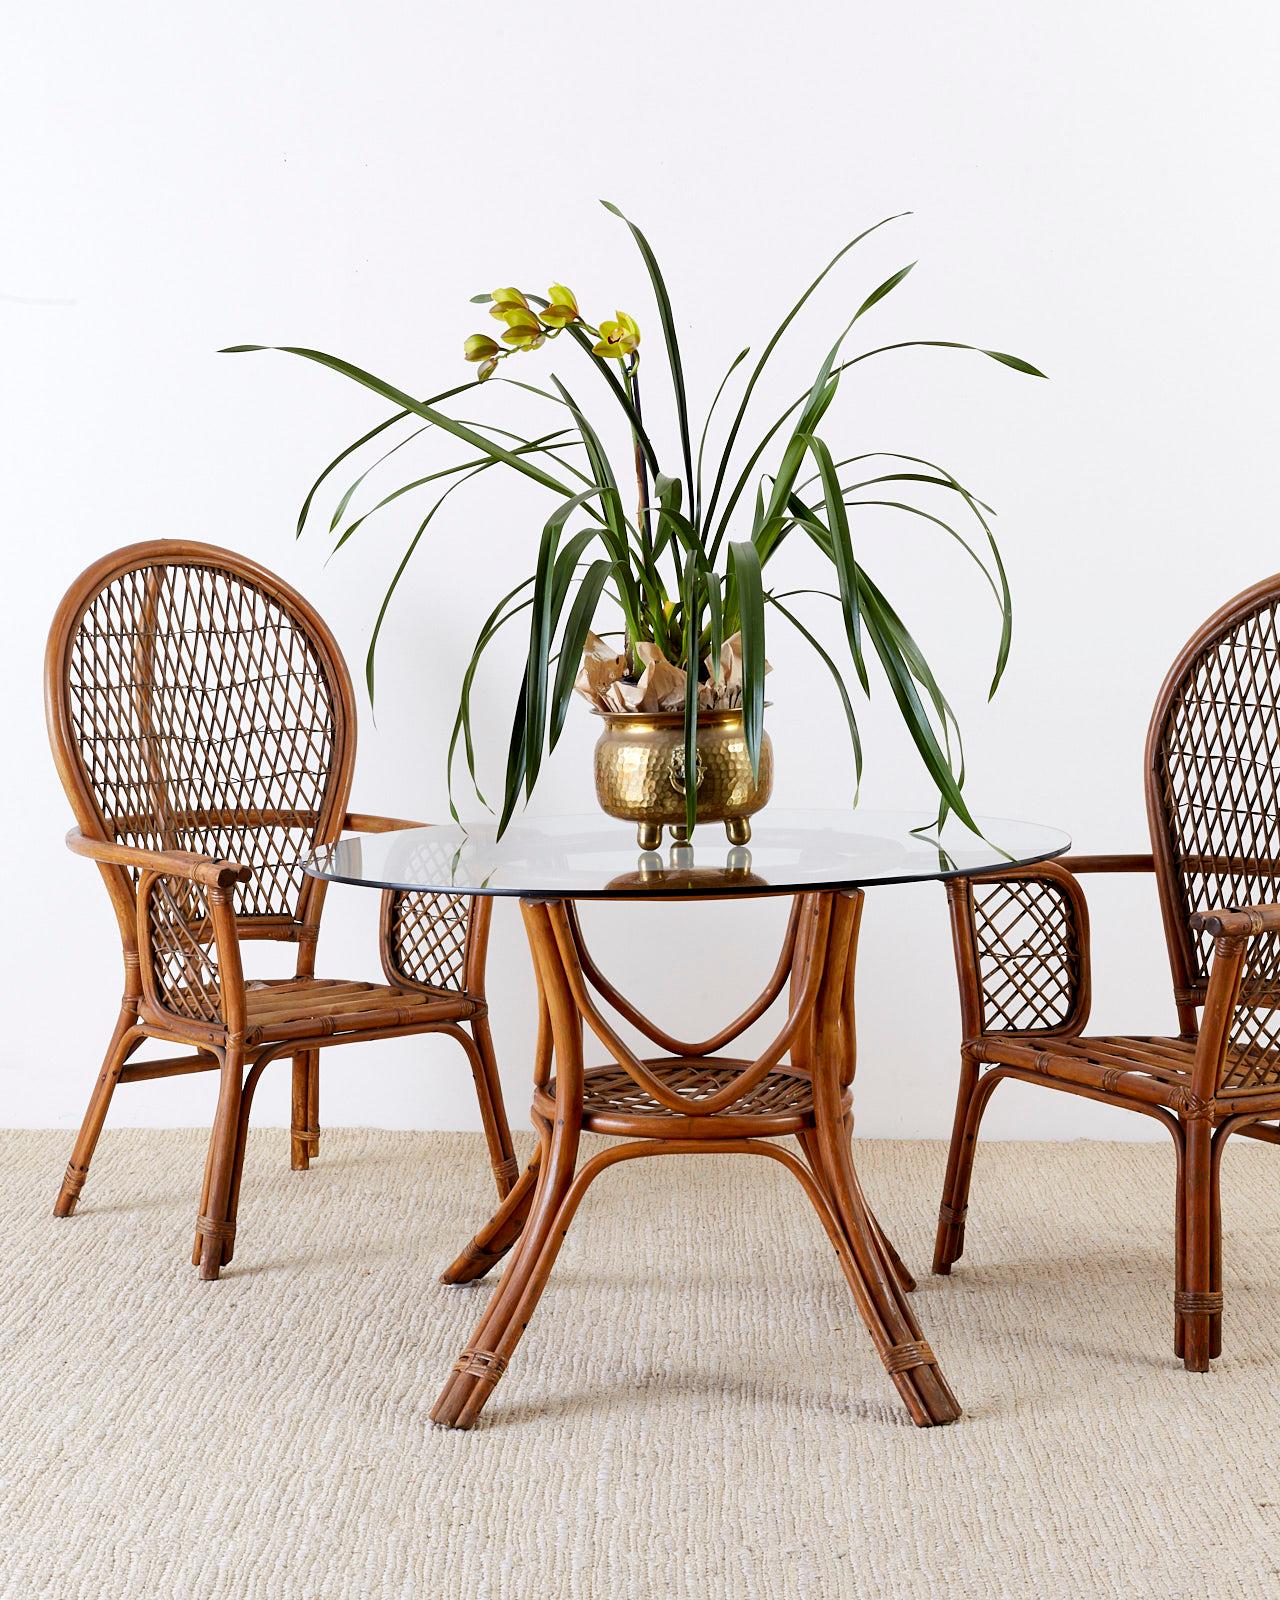 Midcentury set of four rattan bamboo peacock lounge chairs featuring a balloon back with an open lattice fretwork design. Attributed to Ficks Reed and constructed from rattan and wicker. The original finish is faded with a lovely vintage patina. The